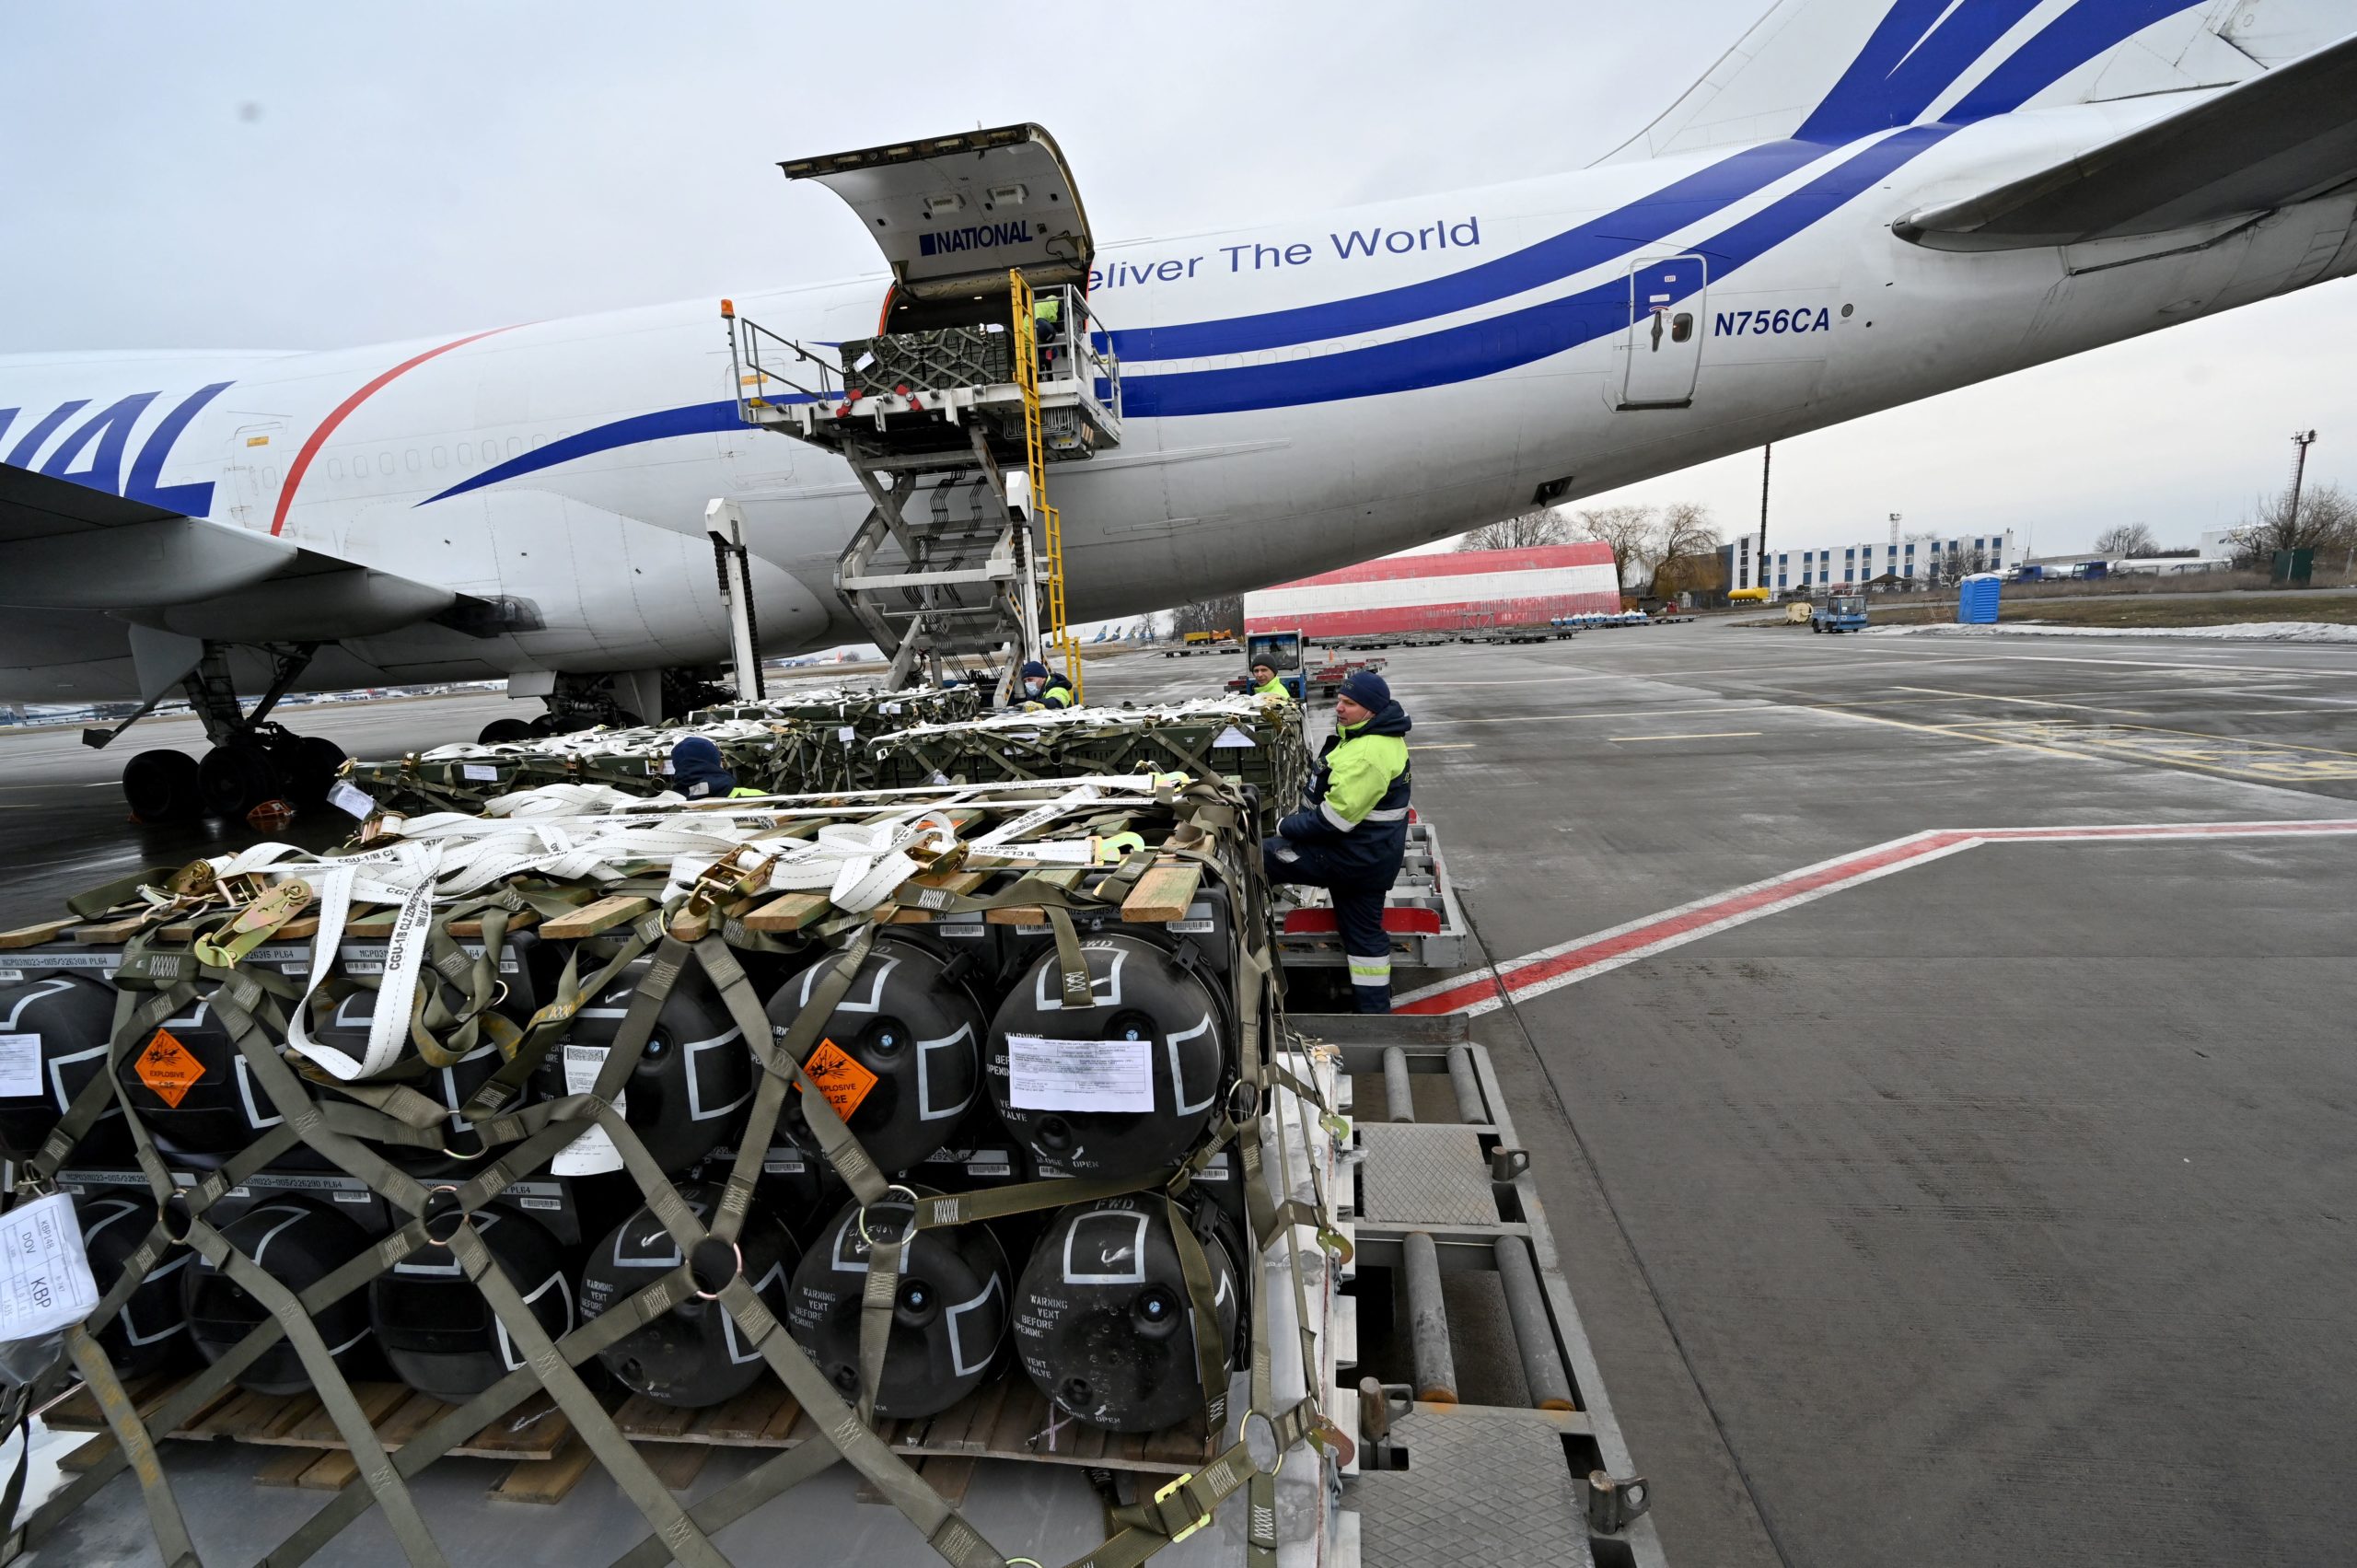 Employees unload a Boeing 747-412 plane with the FGM-148 Javelin, American man-portable anti-tank missile provided by US to Ukraine as part of US military support to Ukraine, at Kyiv's airport Boryspil on February 11,2022, amid the crisis linked with the threat of Russia's invasion. (Photo by Sergei SUPINSKY / AFP) (Photo by SERGEI SUPINSKY/AFP via Getty Images)